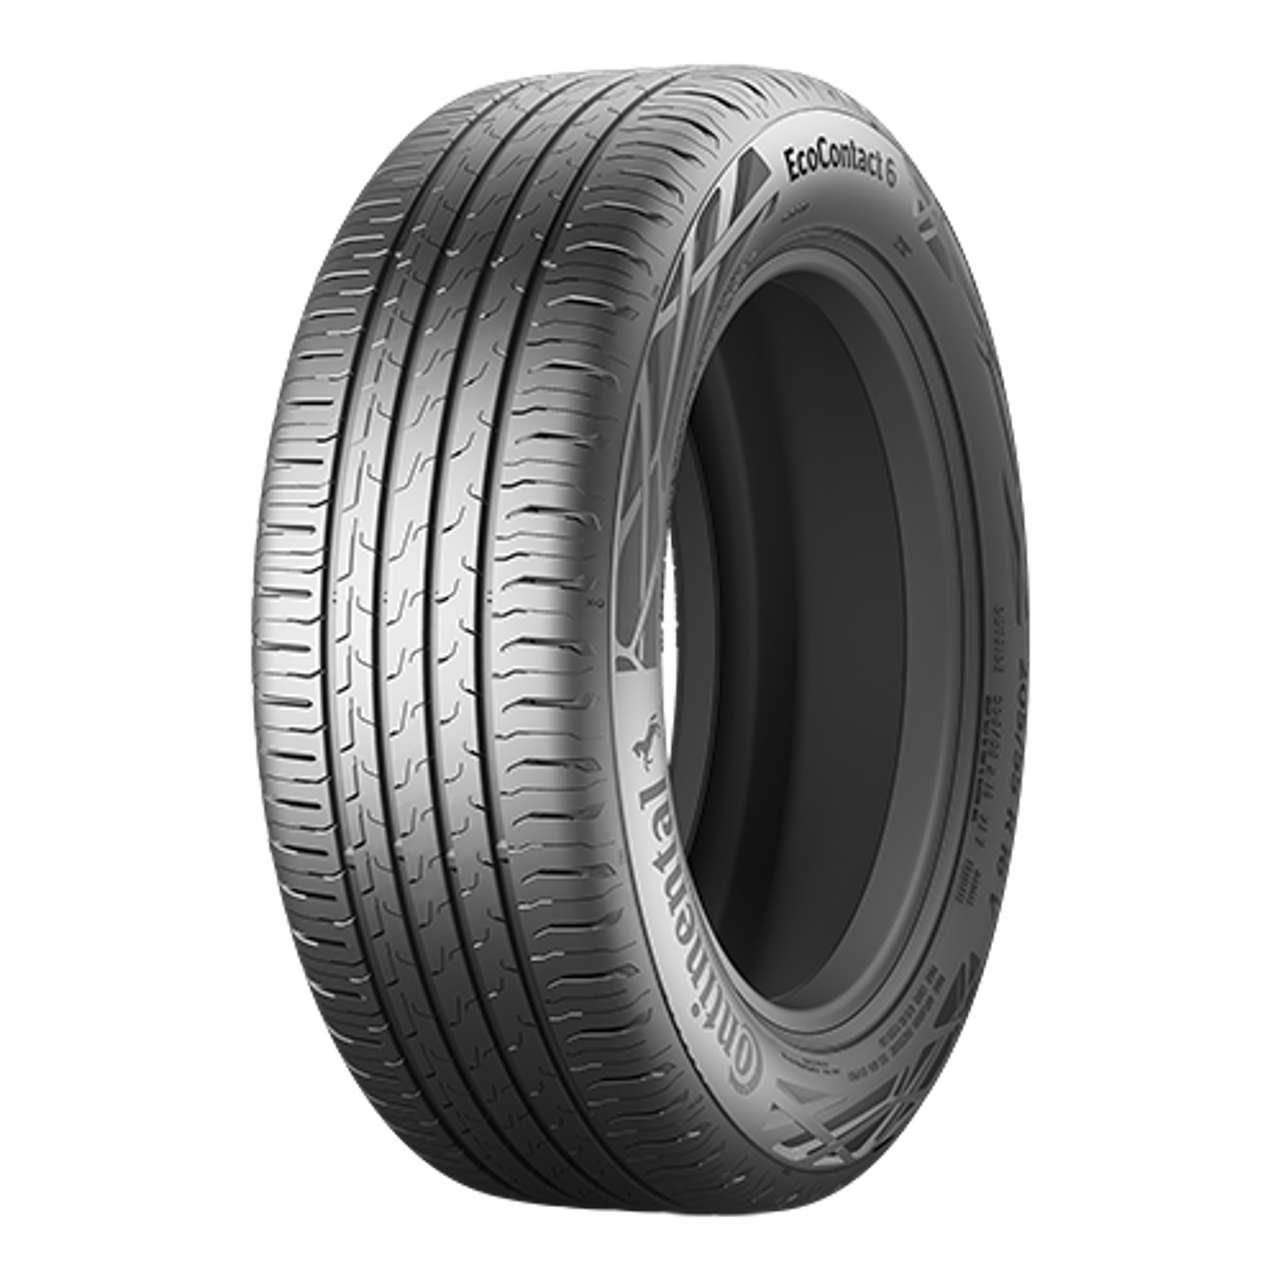 CONTINENTAL ECOCONTACT 6 (EVc) 195/65R15 91V